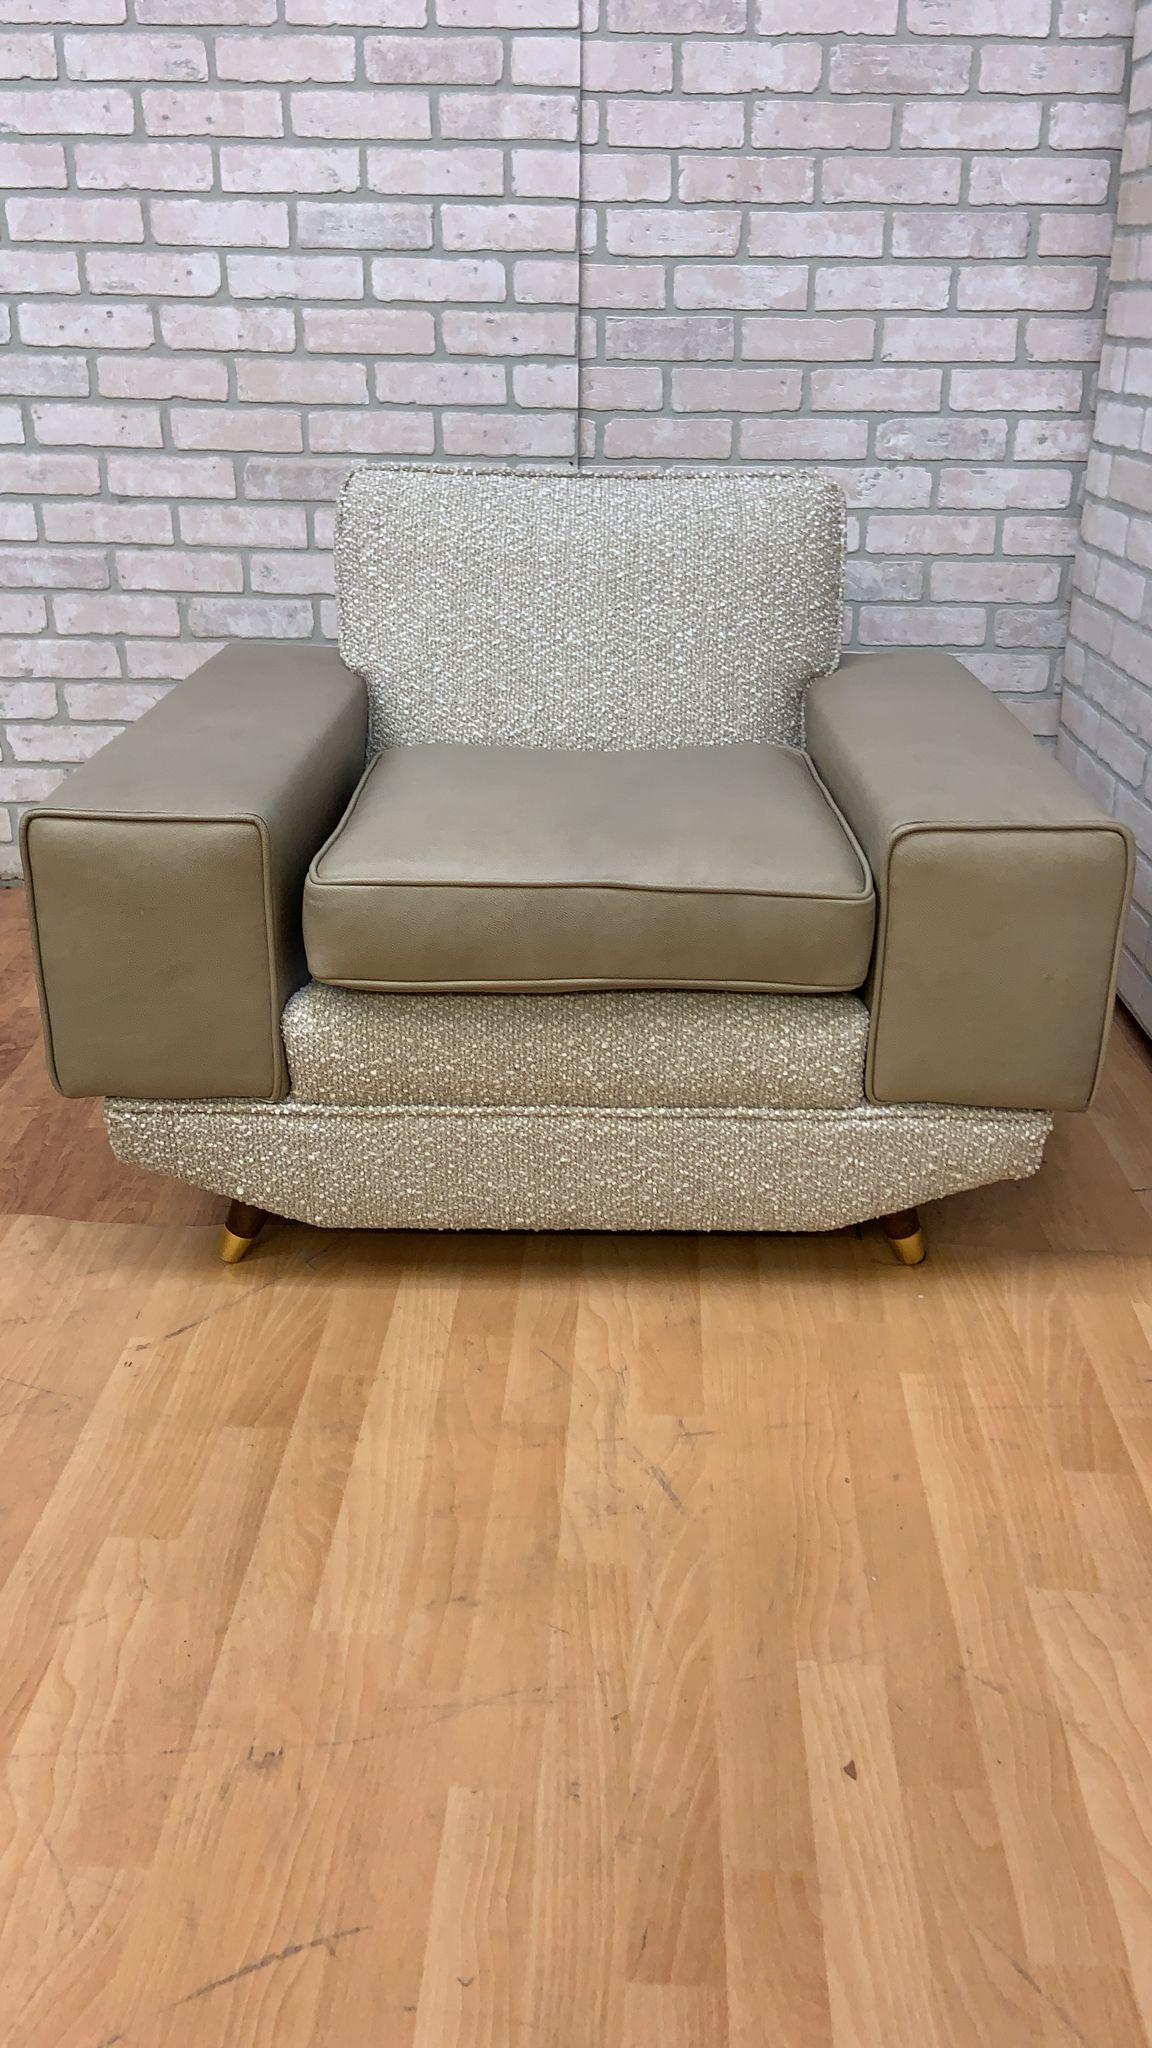 Mid Century Deco Convertible Daybed Sofa & Club Chair Set Newly Upholstered in a Boucle and Leather - 2 Piece Set 

These gorgeous Mid Century Deco Convertible Daybed 3 Seat Sofa & Matching Club Chair Set has been completely restored and fully